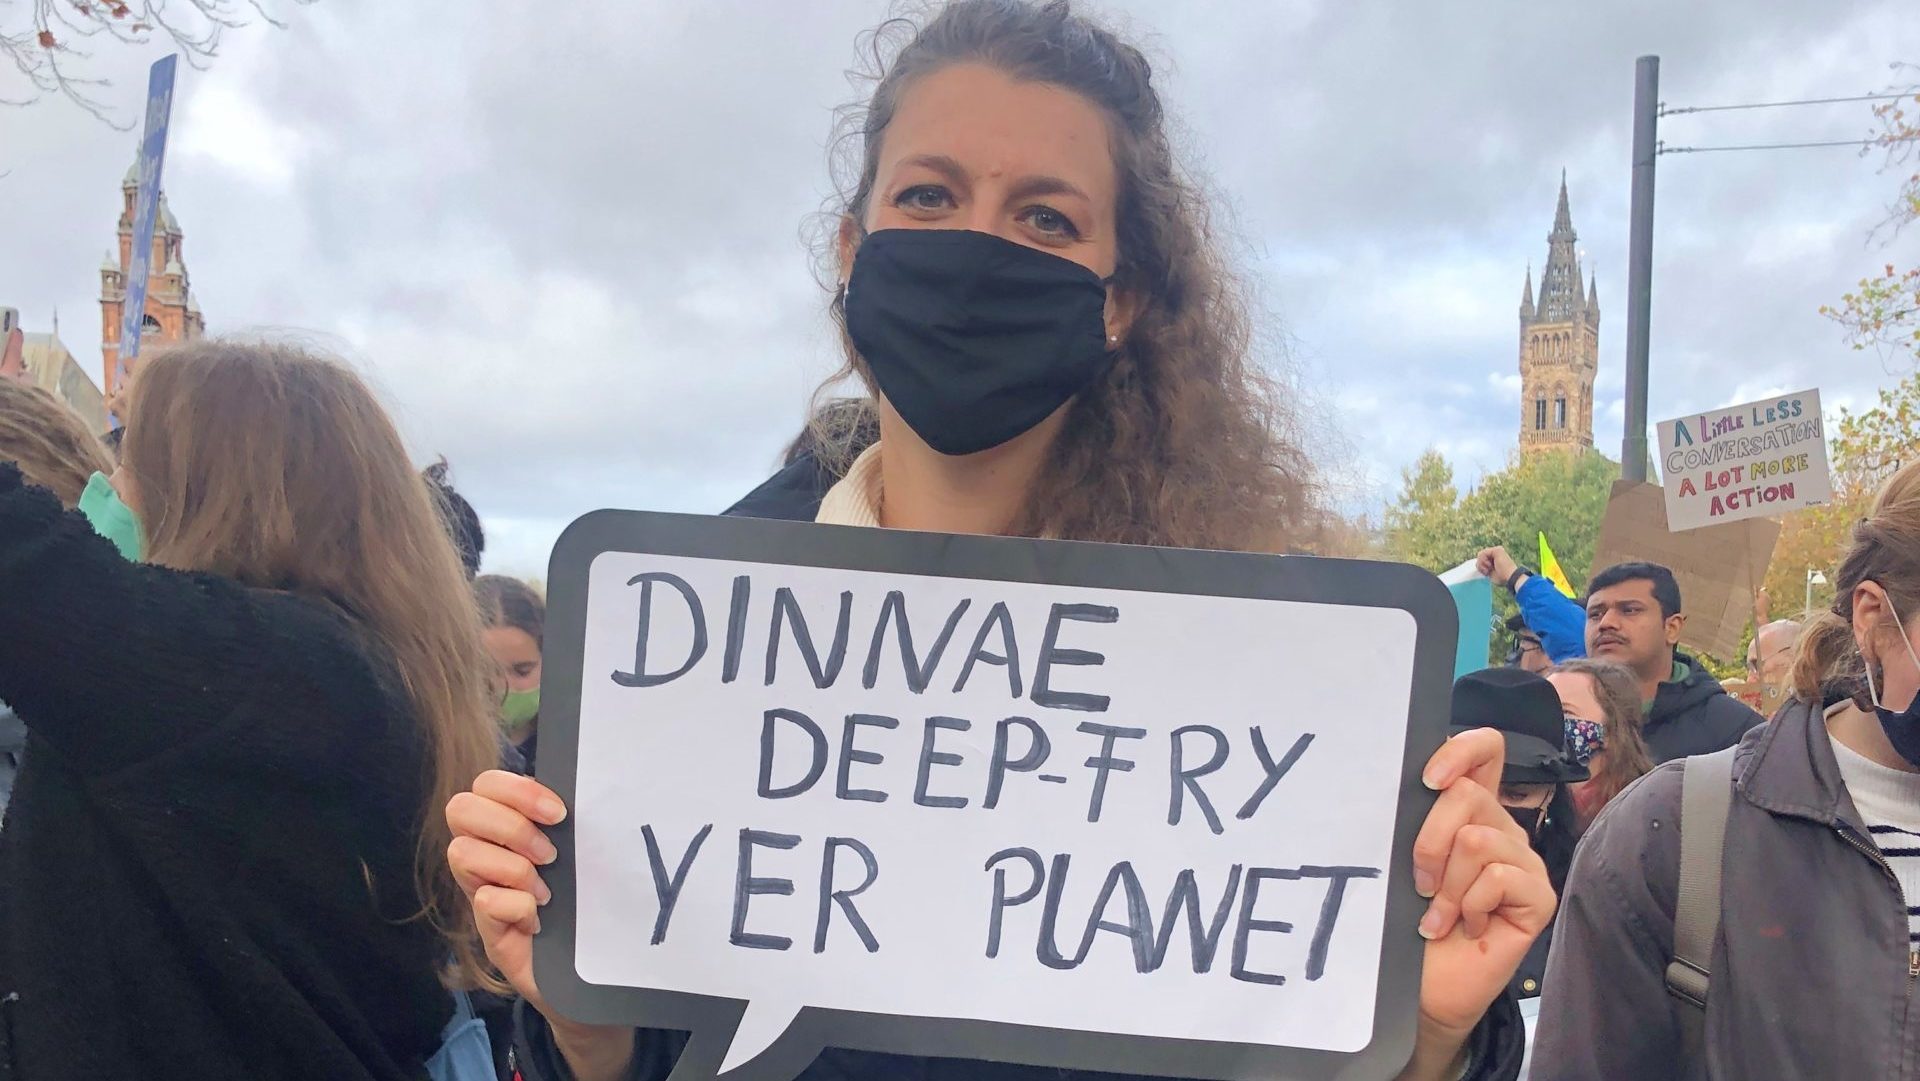 A protester on the youth climate strike with a sign reading "dinnae deep-fry yer planet". Image: Sarah Wilson